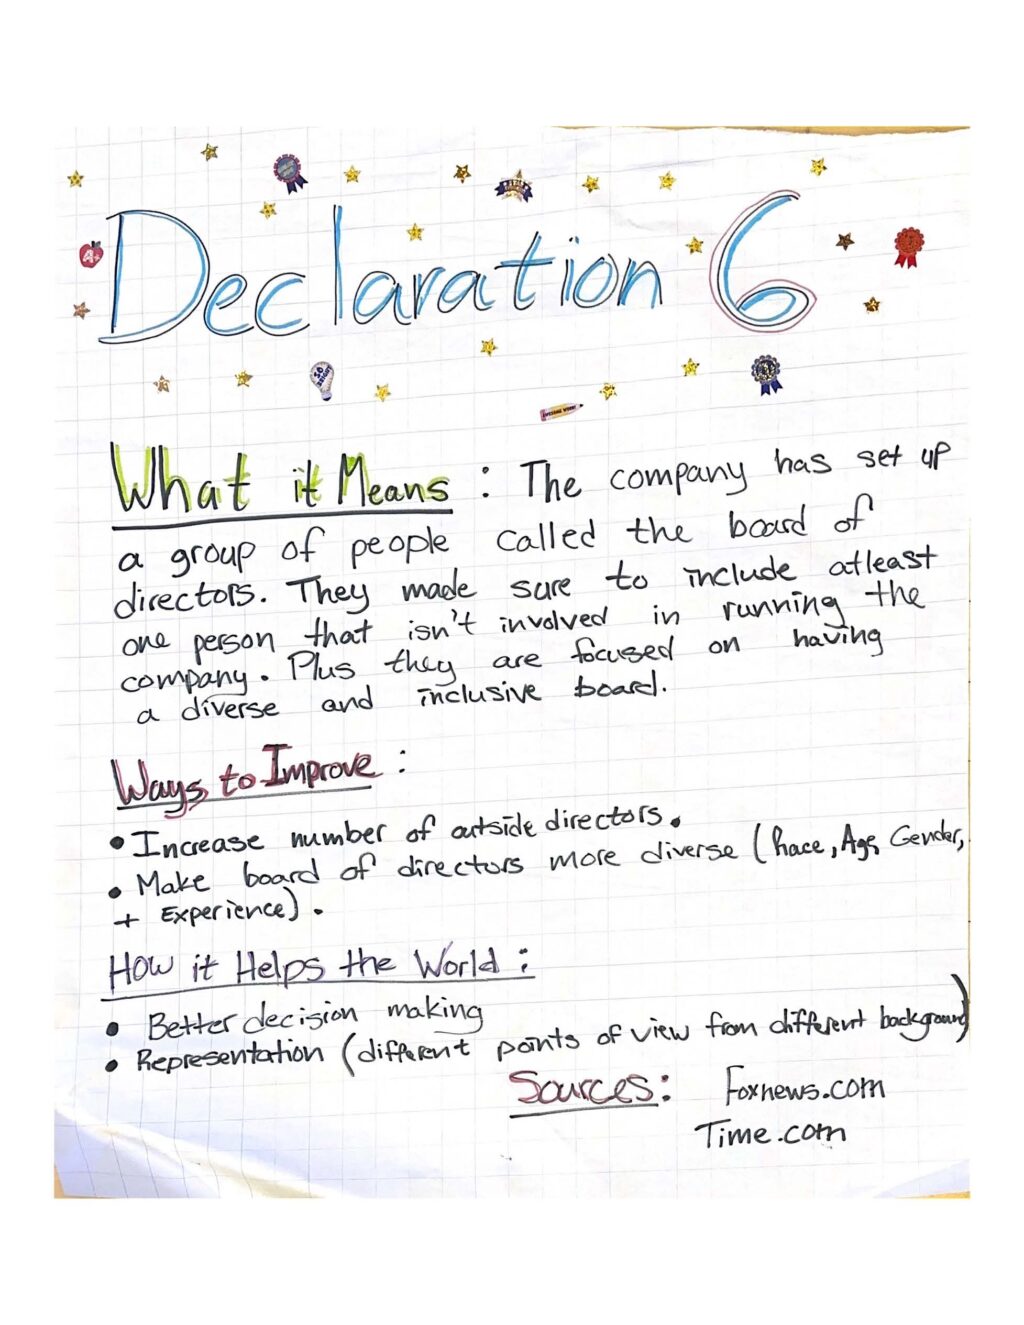 Handwritten note highlighting the basic ideas behind declaration six from the book, "The Mission Corporation: How contemporary capitalism can change the world one business at a time"